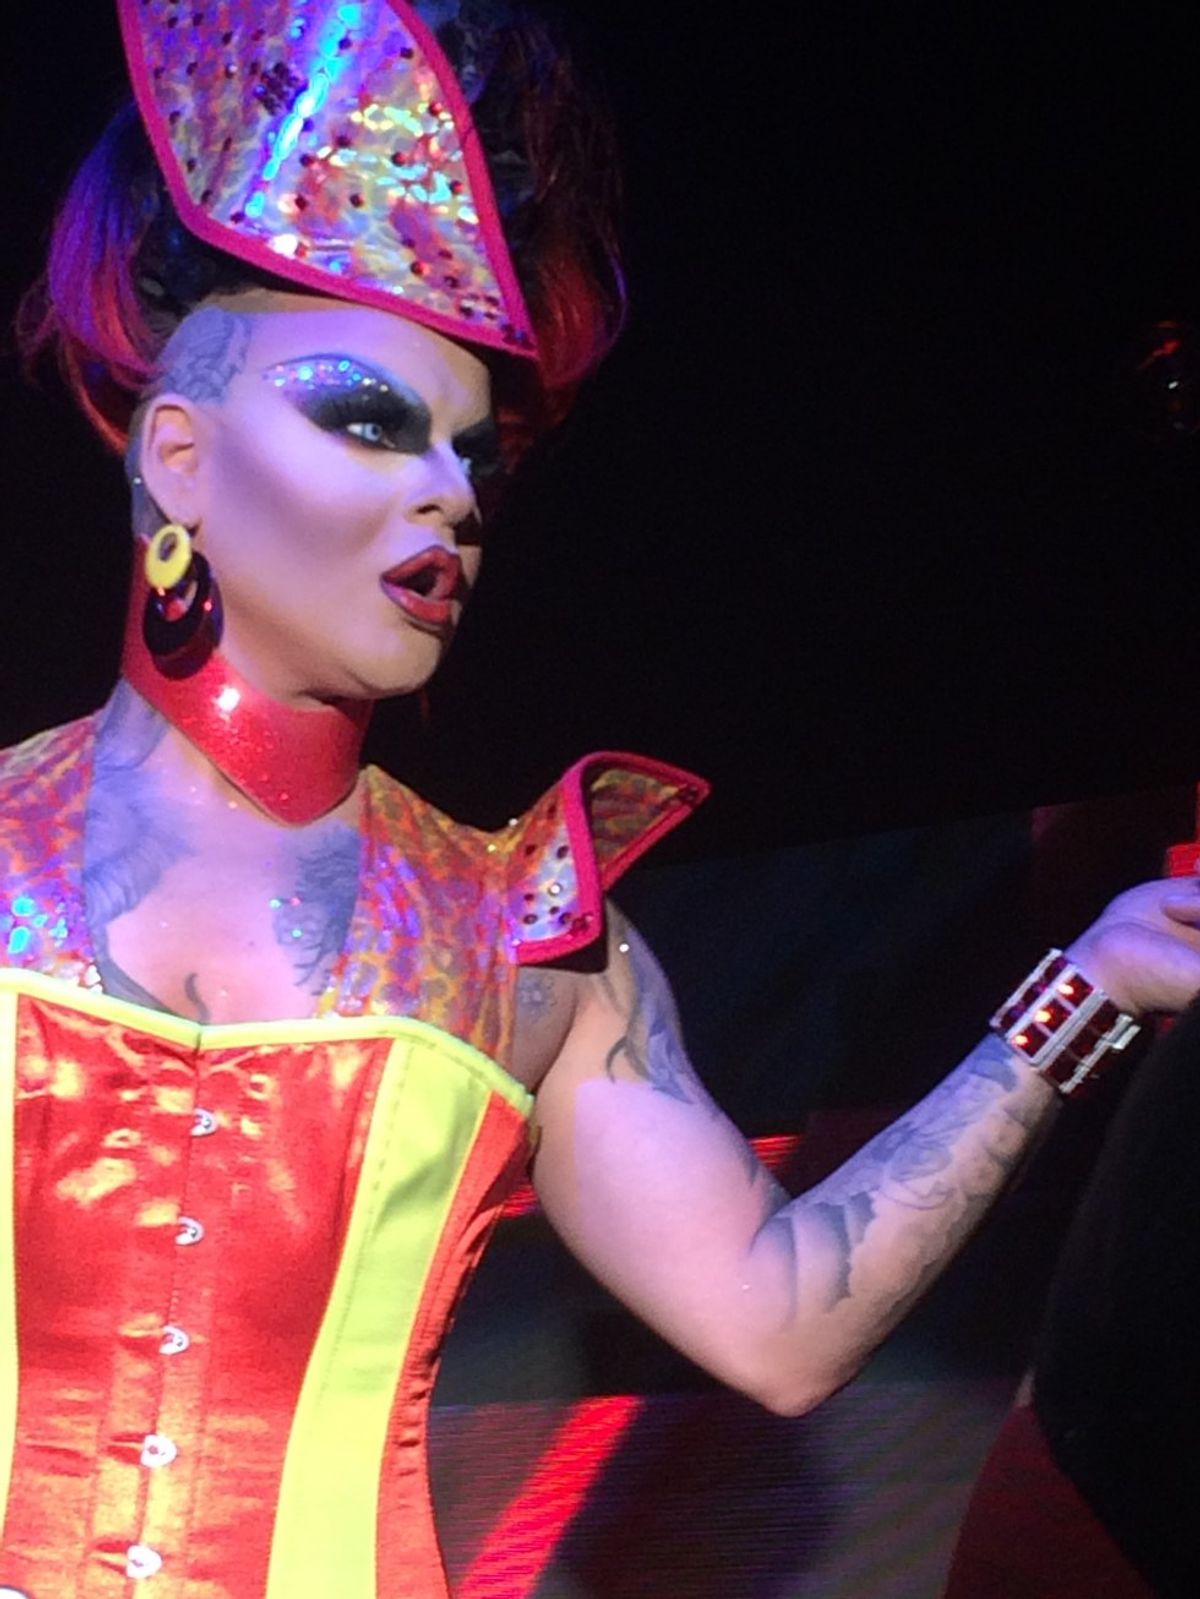 My Open Letter To Nina Flowers: Thank You